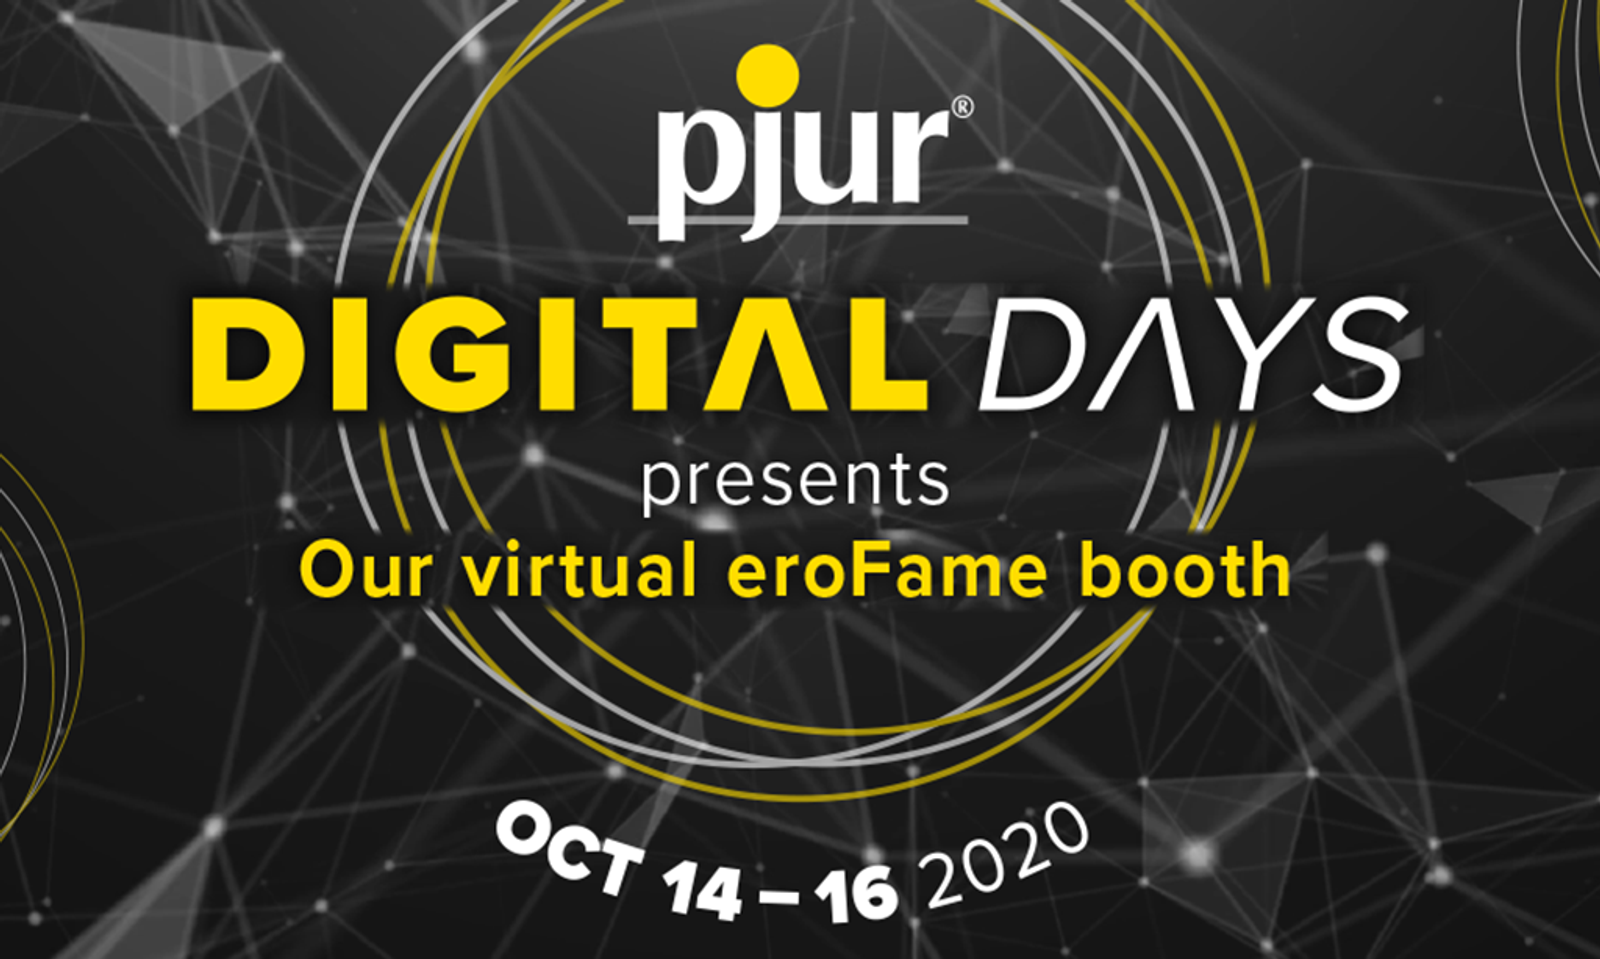 Pjur to Hold 'Digital Days' in Its Virtual eroFame Booth